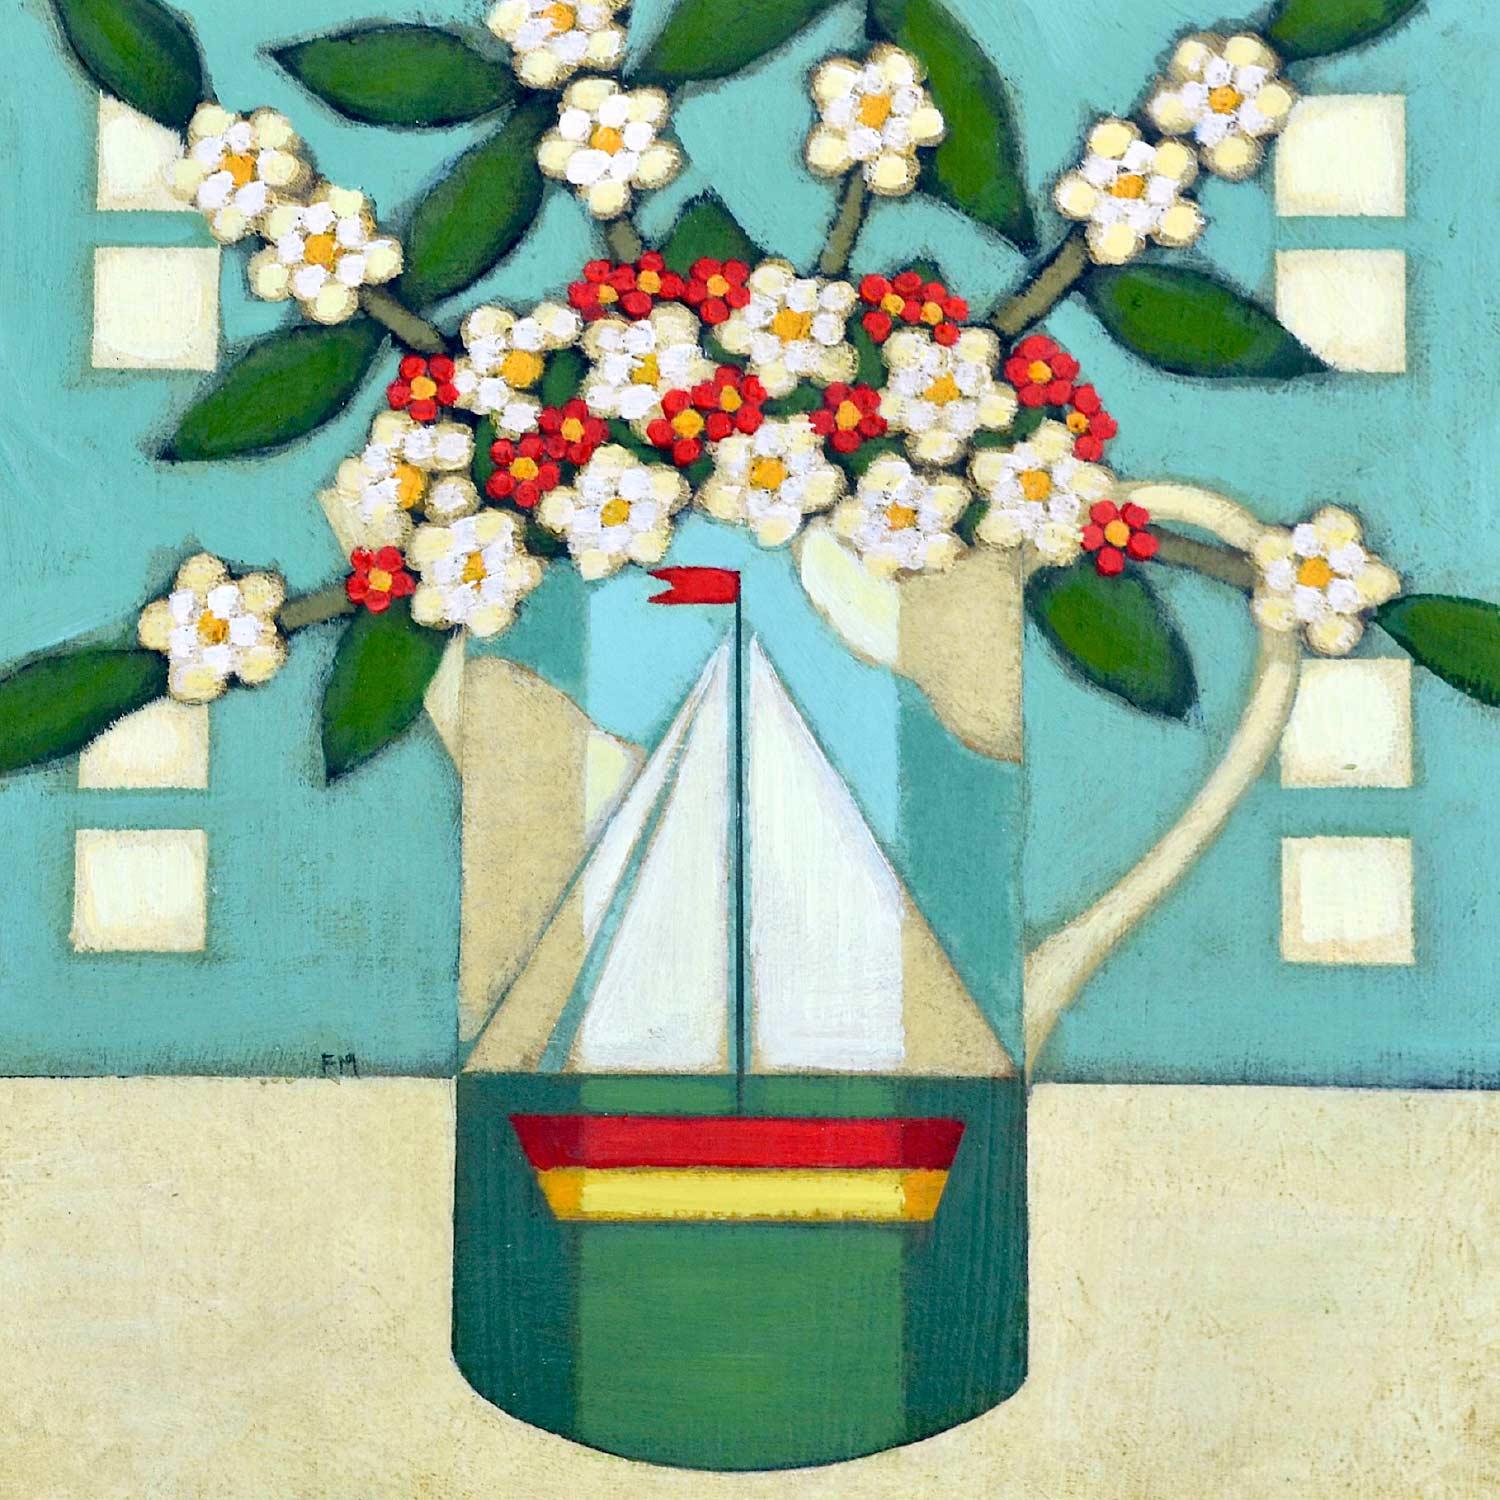 Blossom in a Boat Jug by Fiona Millar